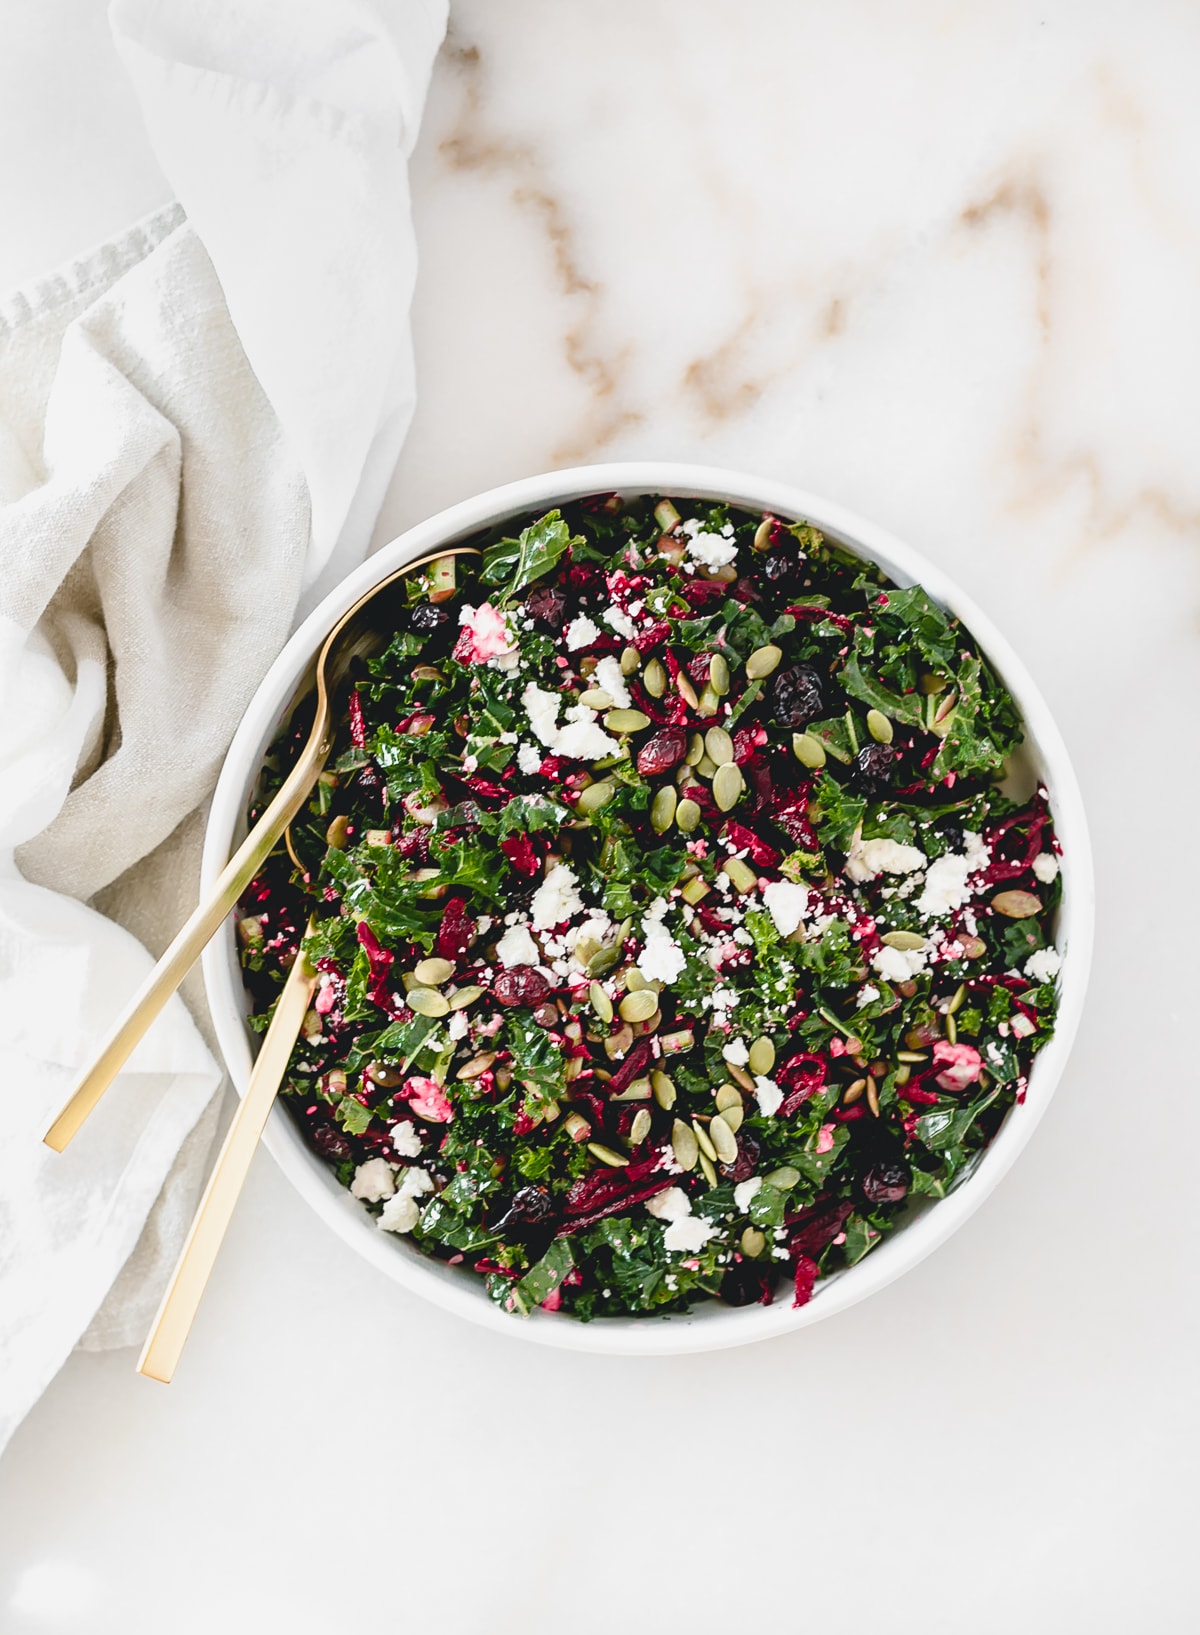 This delicious shredded beet kale salad is loaded with nutritious powerhouses like kale, roasted beets, pumpkin seeds, and dried cherries. It's the perfect winter salad! (gluten free, vegetarian, vegan option) via livelytable.com